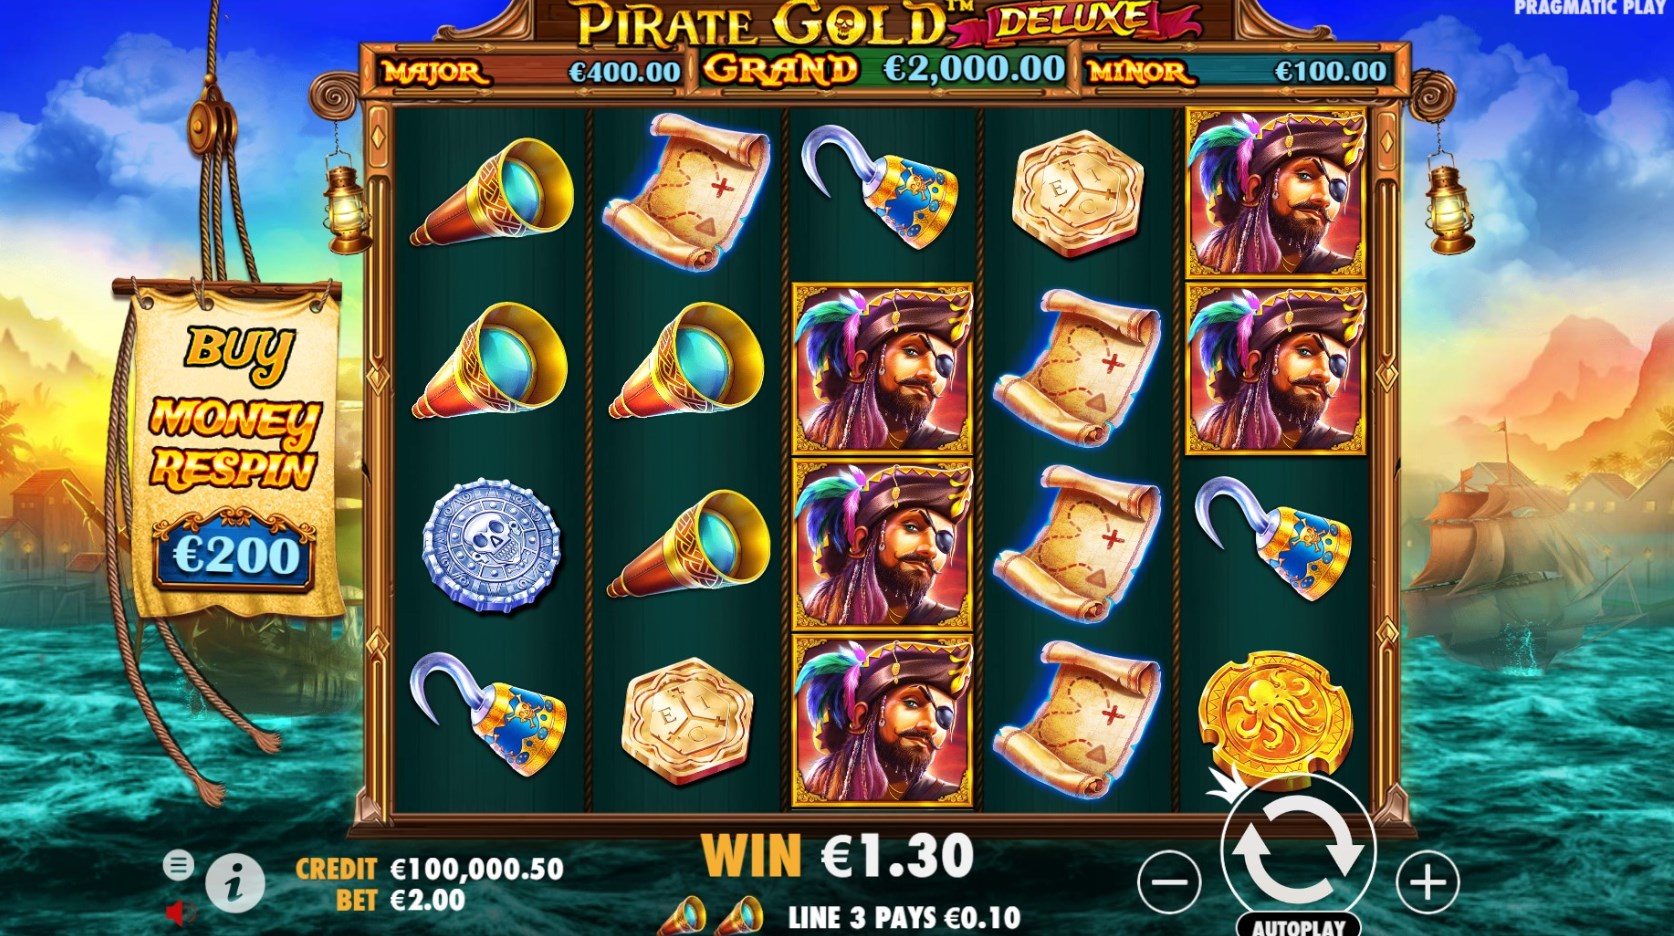 Pirate Gold Deluxe pragmatic play apk download for android  1.0.0 screenshot 1